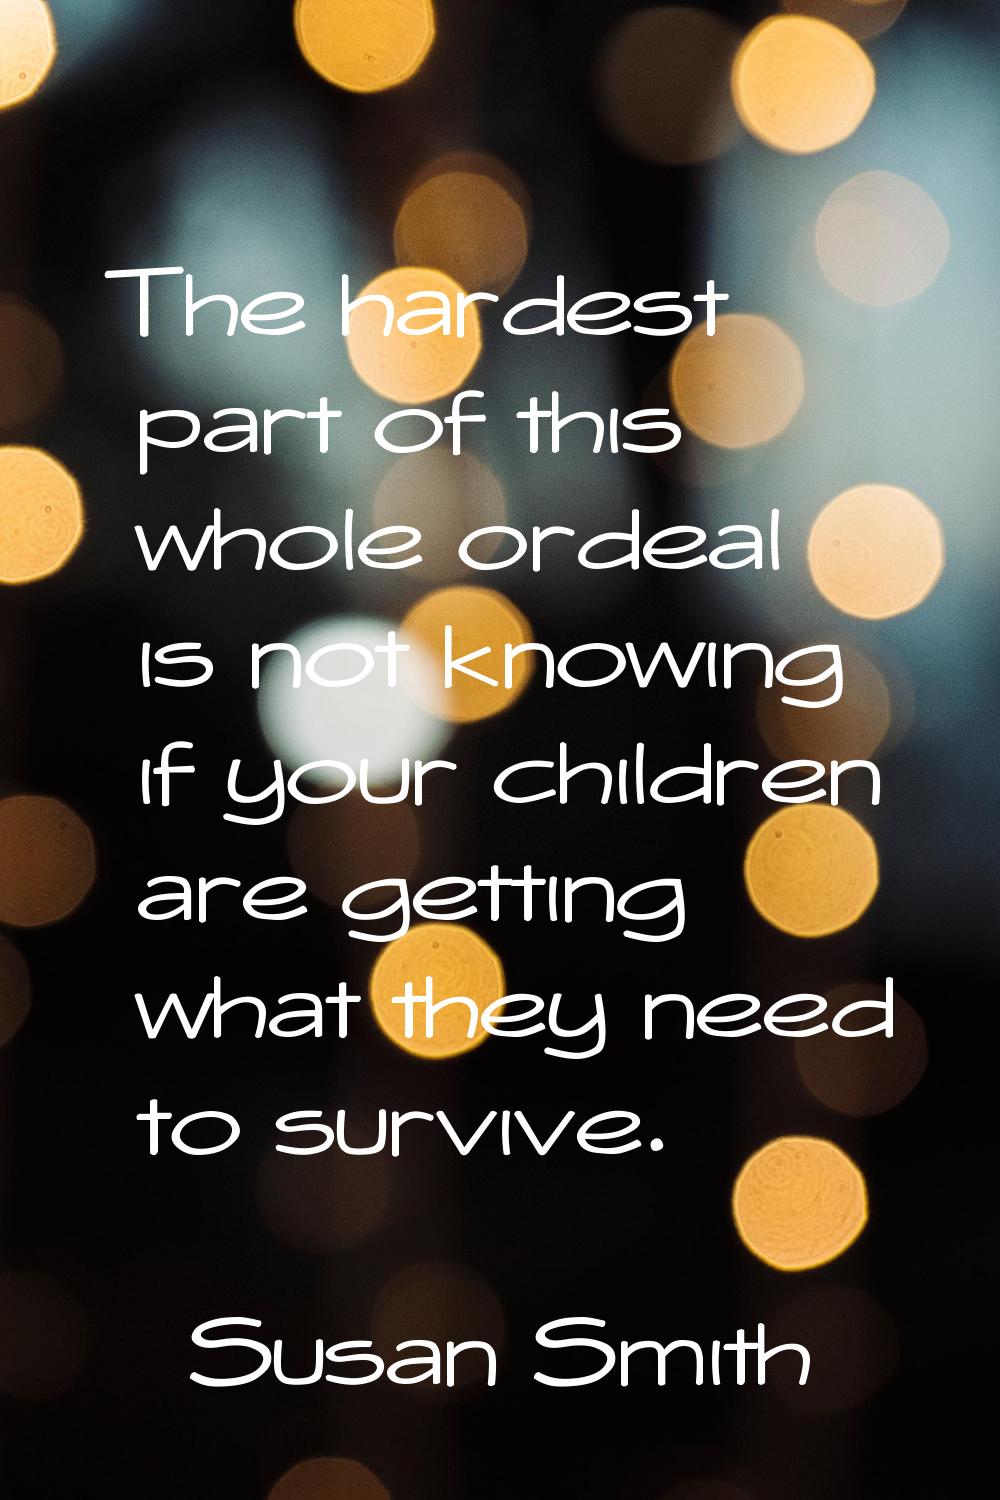 The hardest part of this whole ordeal is not knowing if your children are getting what they need to